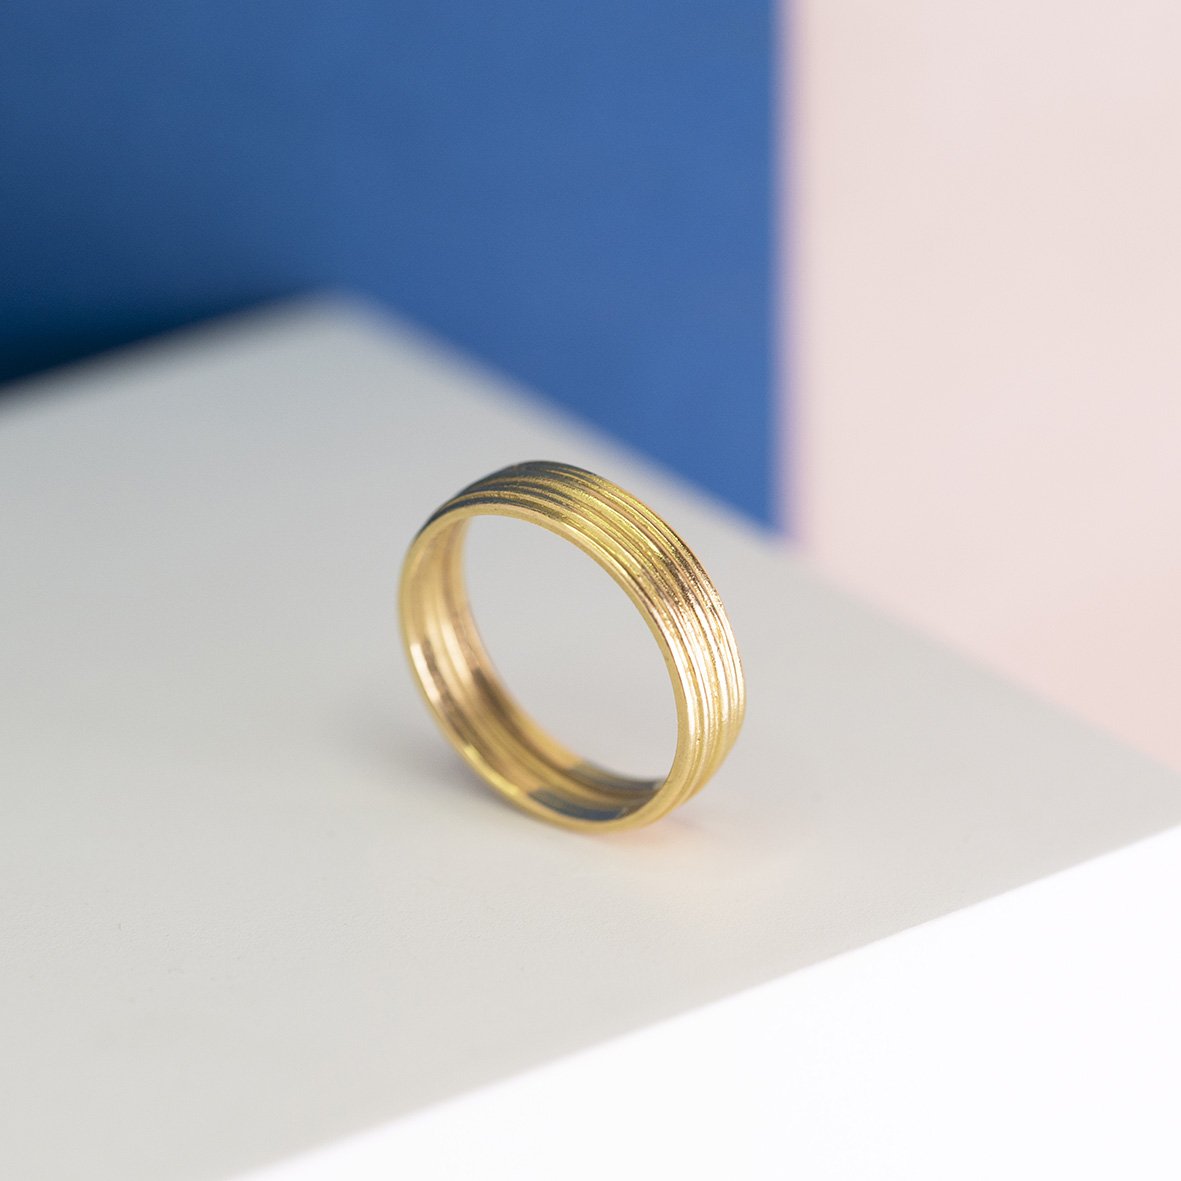  A modern, stylish, plain gold wedding band with textured lines etched into it. 